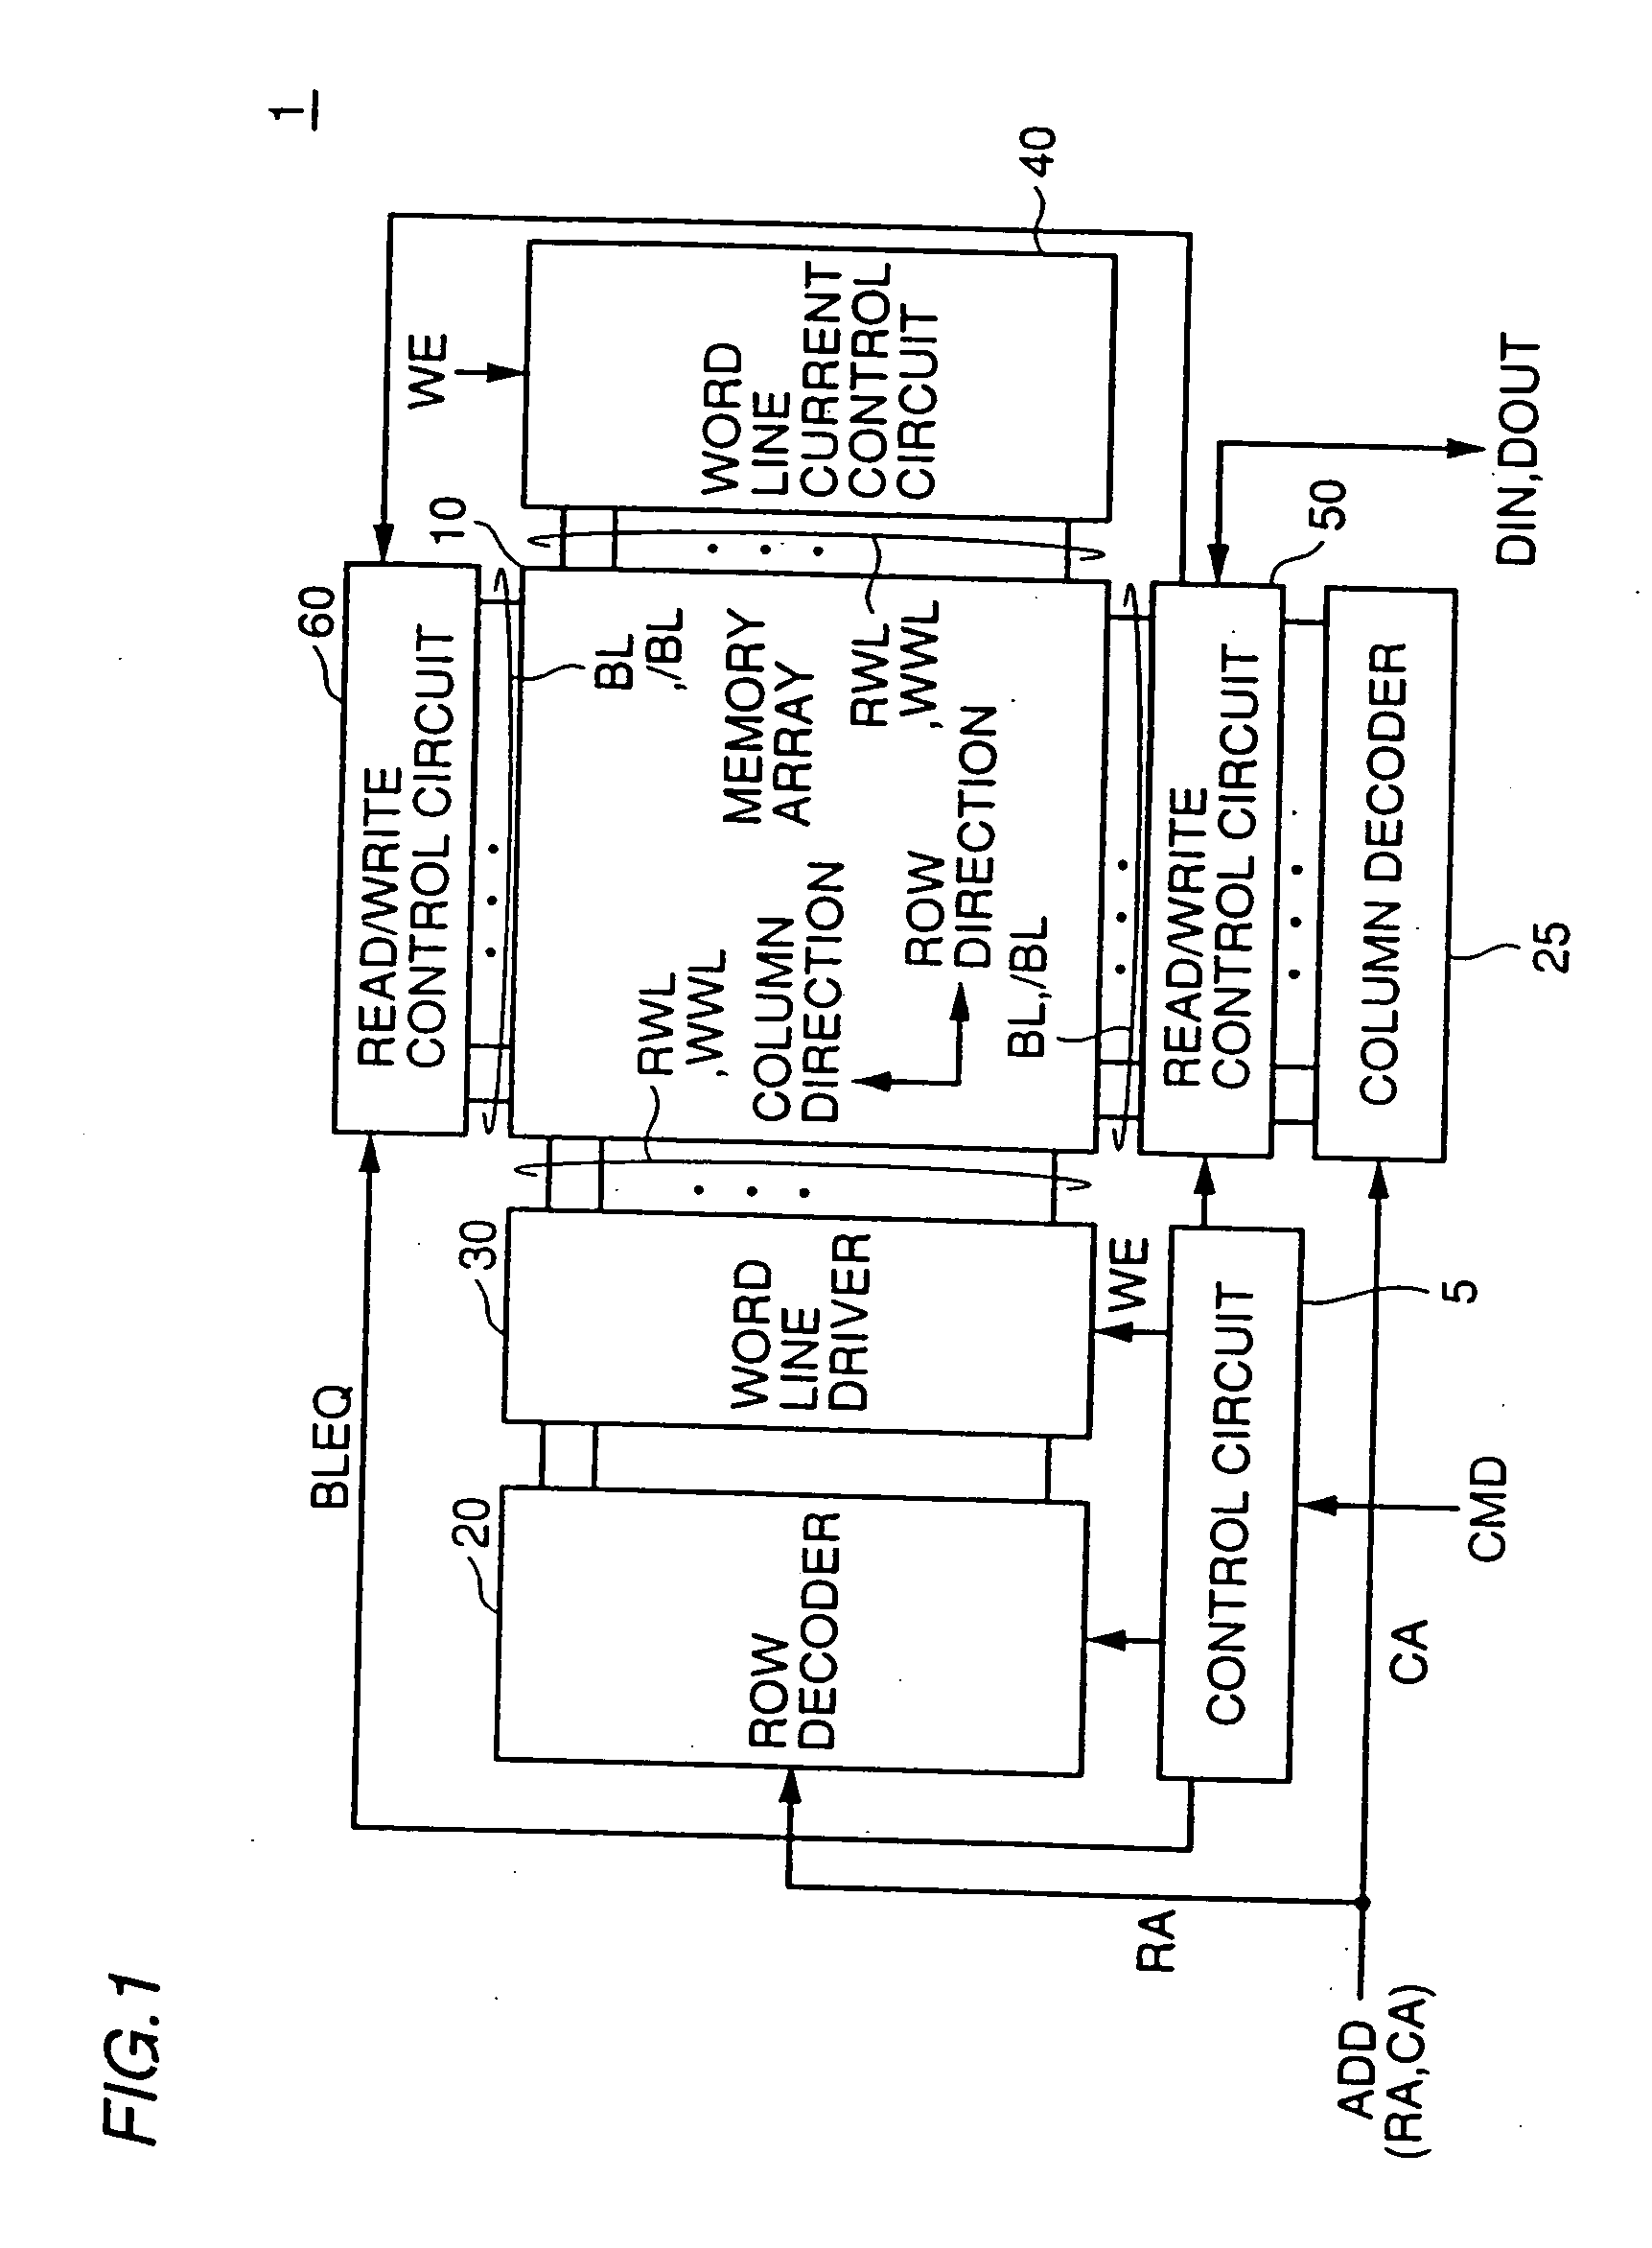 Thin film magnetic memory device including memory cells having a magnetic tunnel junction